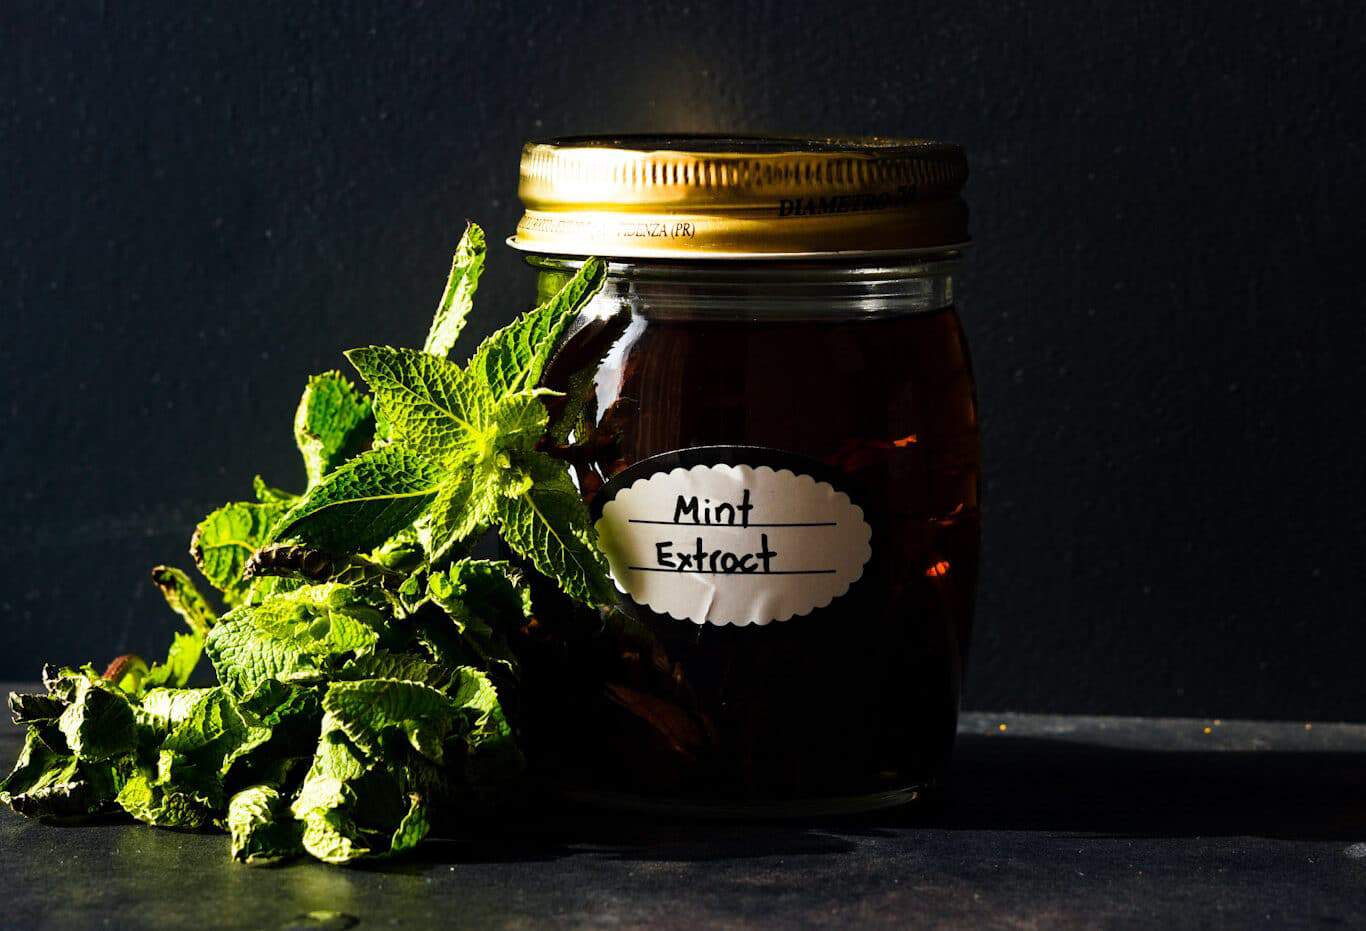 Mint extract in a glass jar.